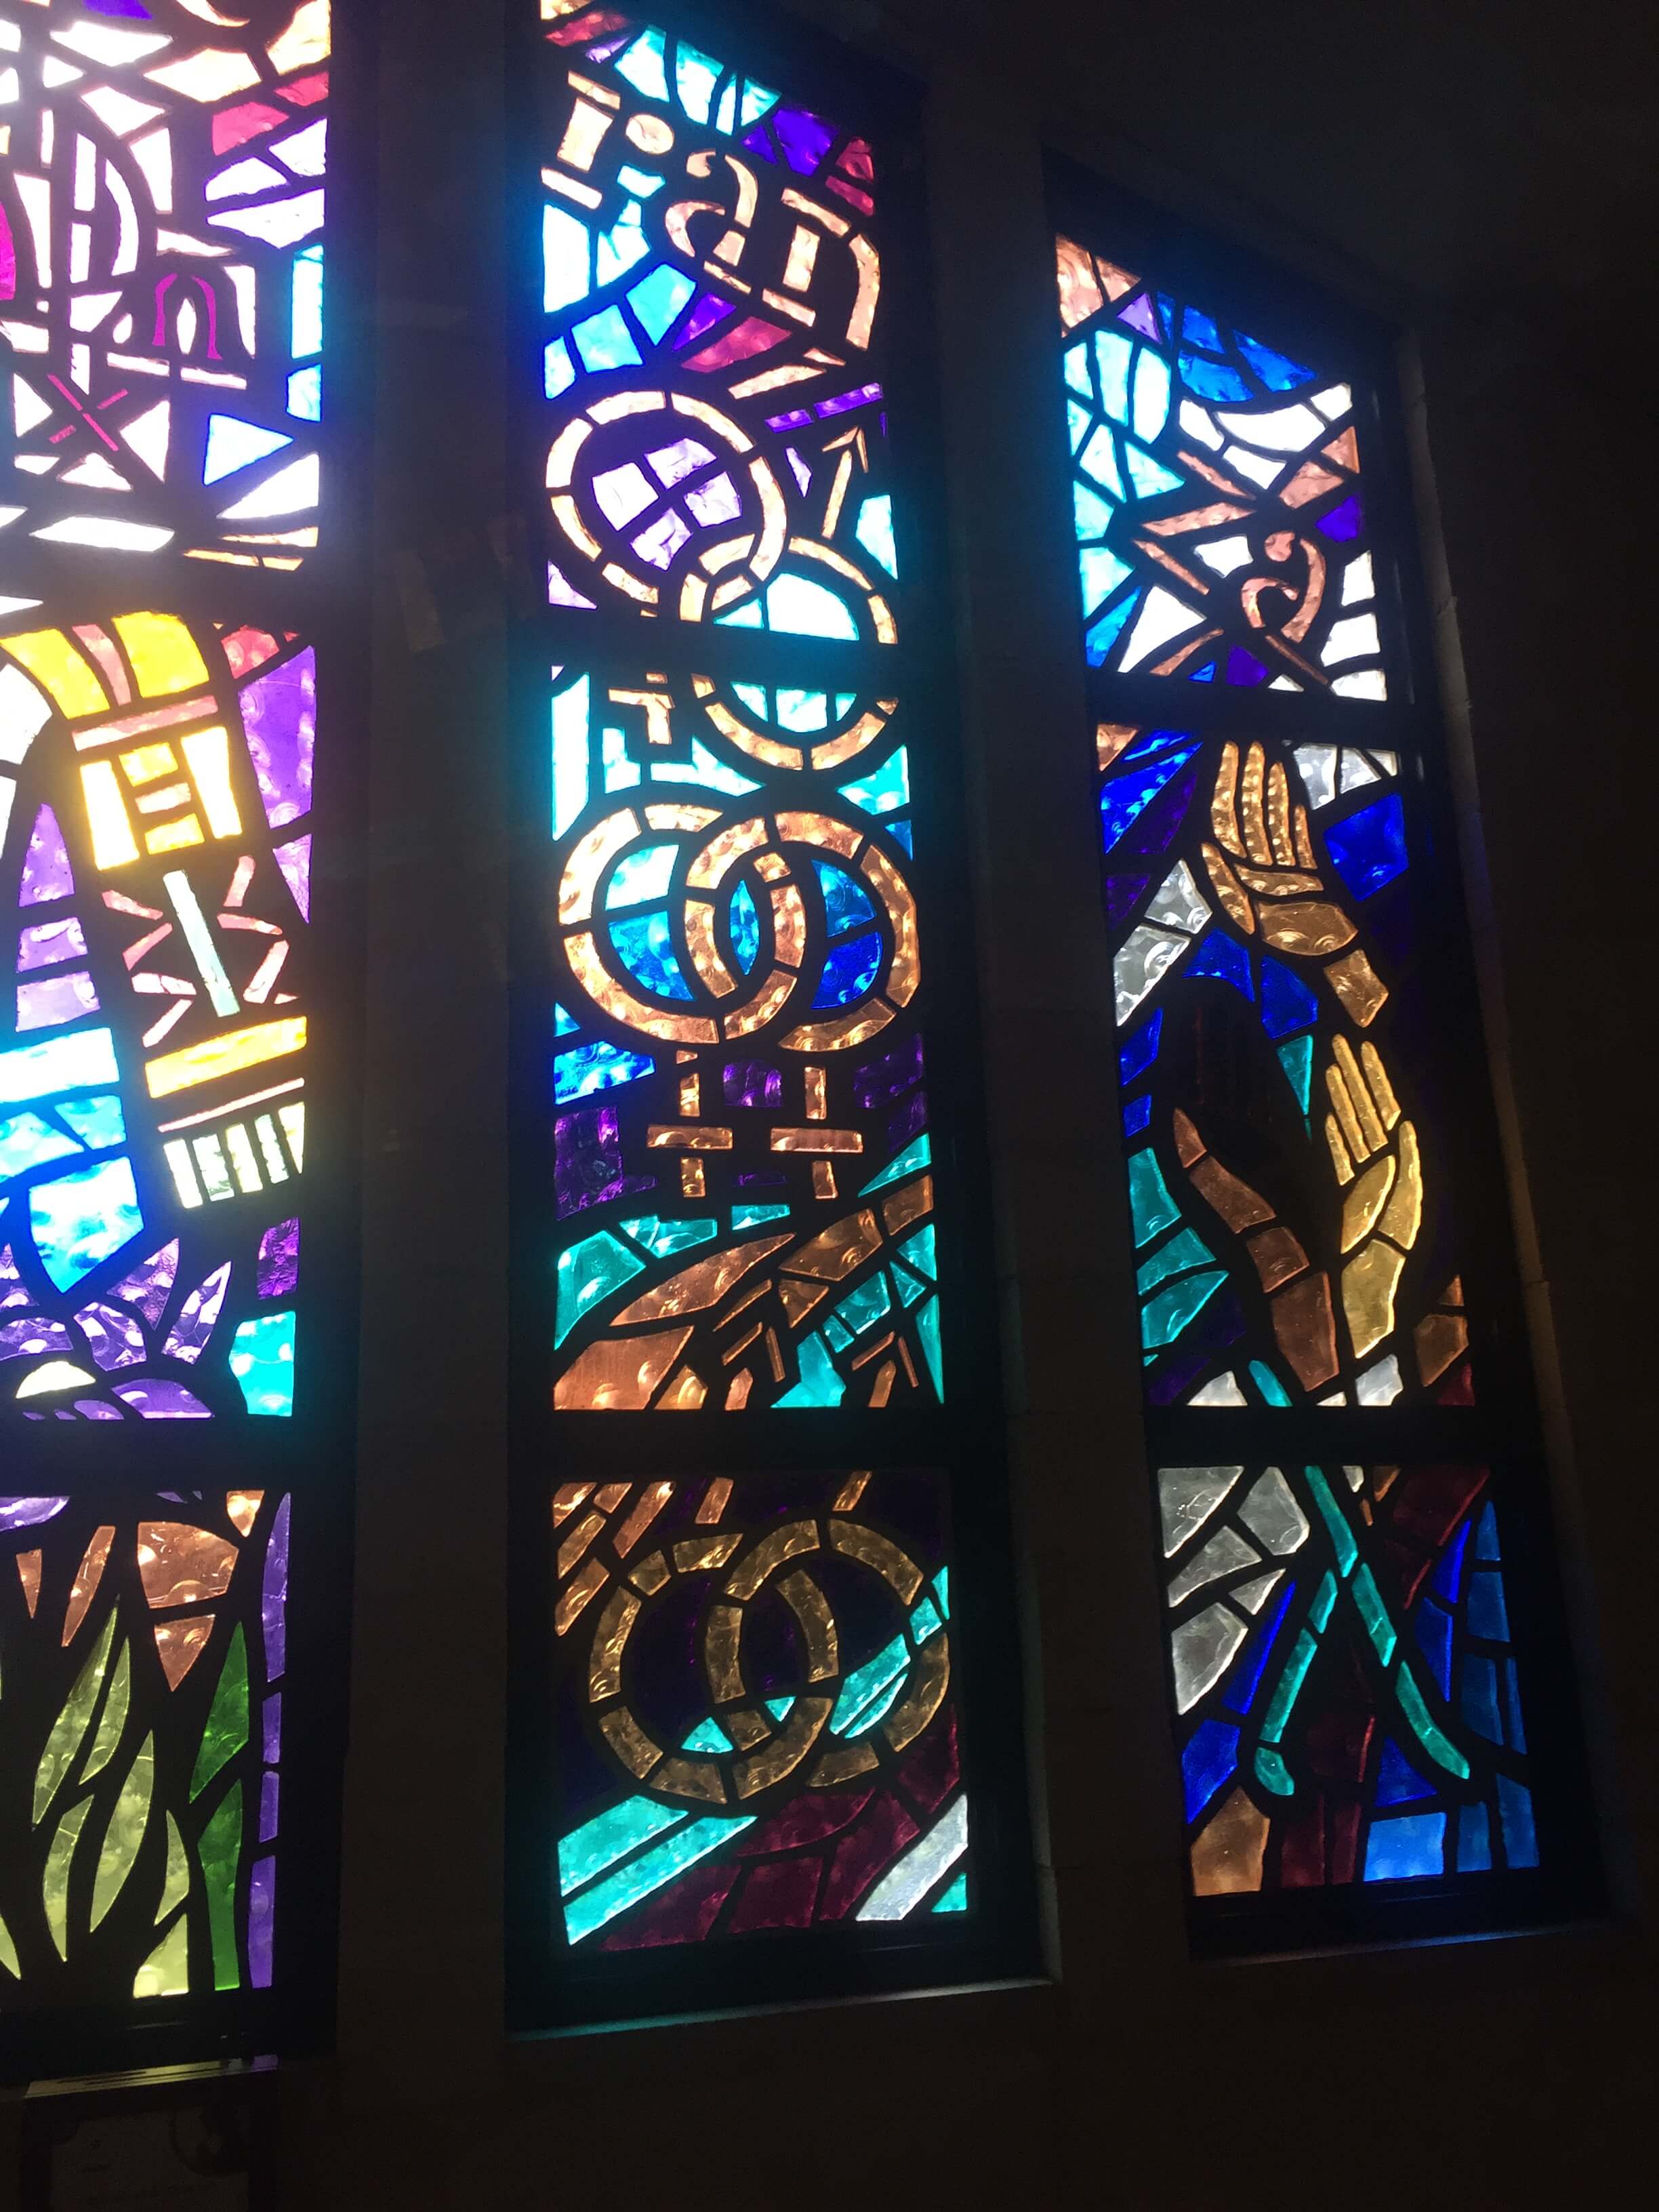 Still from Mama Bears. A stained glass window of purples, greens, and golds. There are multiple linked gender symbols, hands, and letters that read, "ran" and "za".